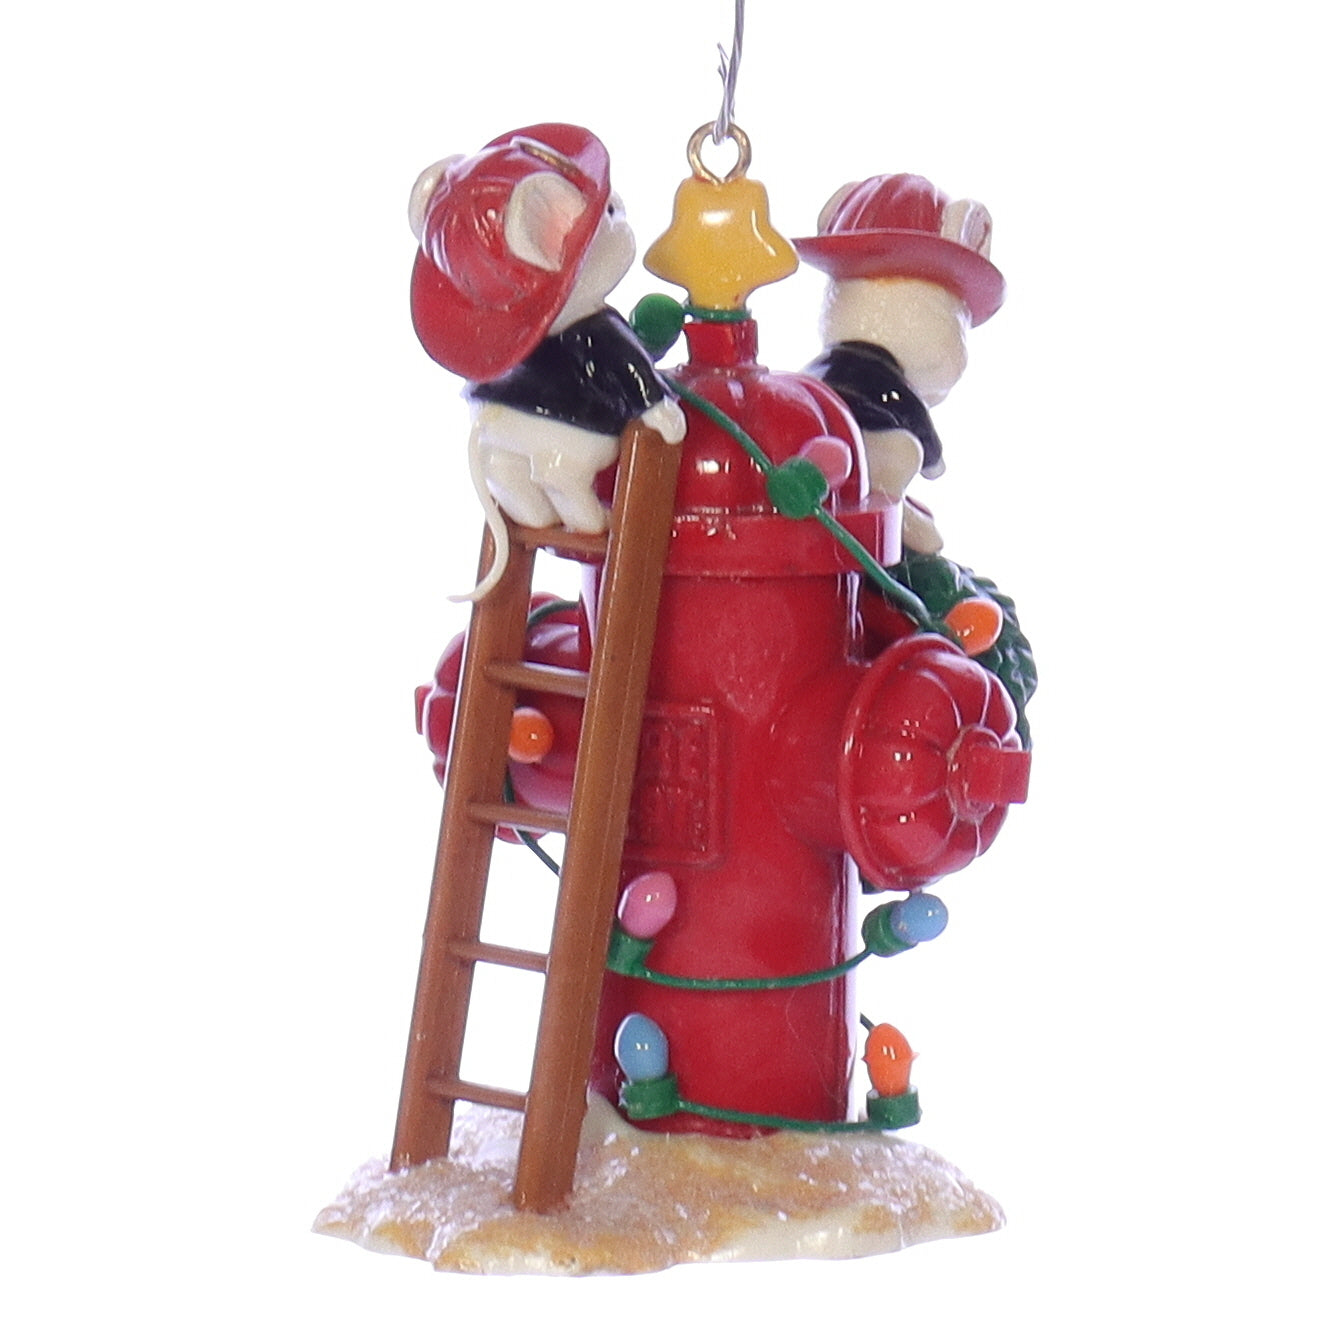 Enesco_Treasury_of_Christmas_Ornaments_573825_Warmest_Wishes_Northpole_Fire_Department_Mouse_Ornament_1990 Back Left View